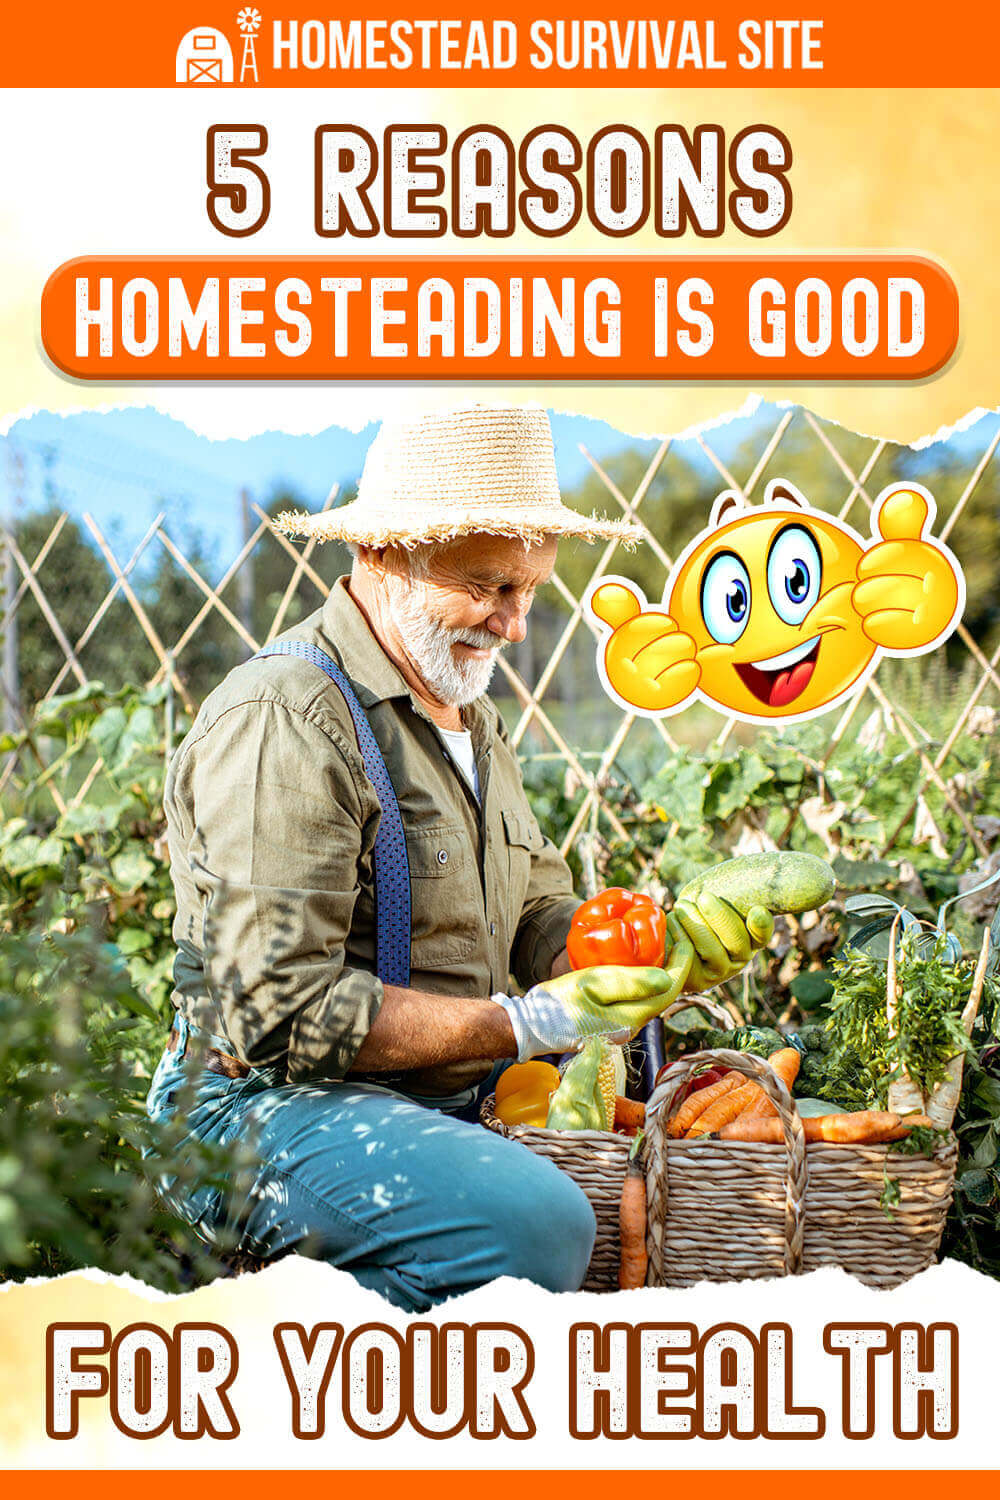 5 Reasons Homesteading is Good for Your Health